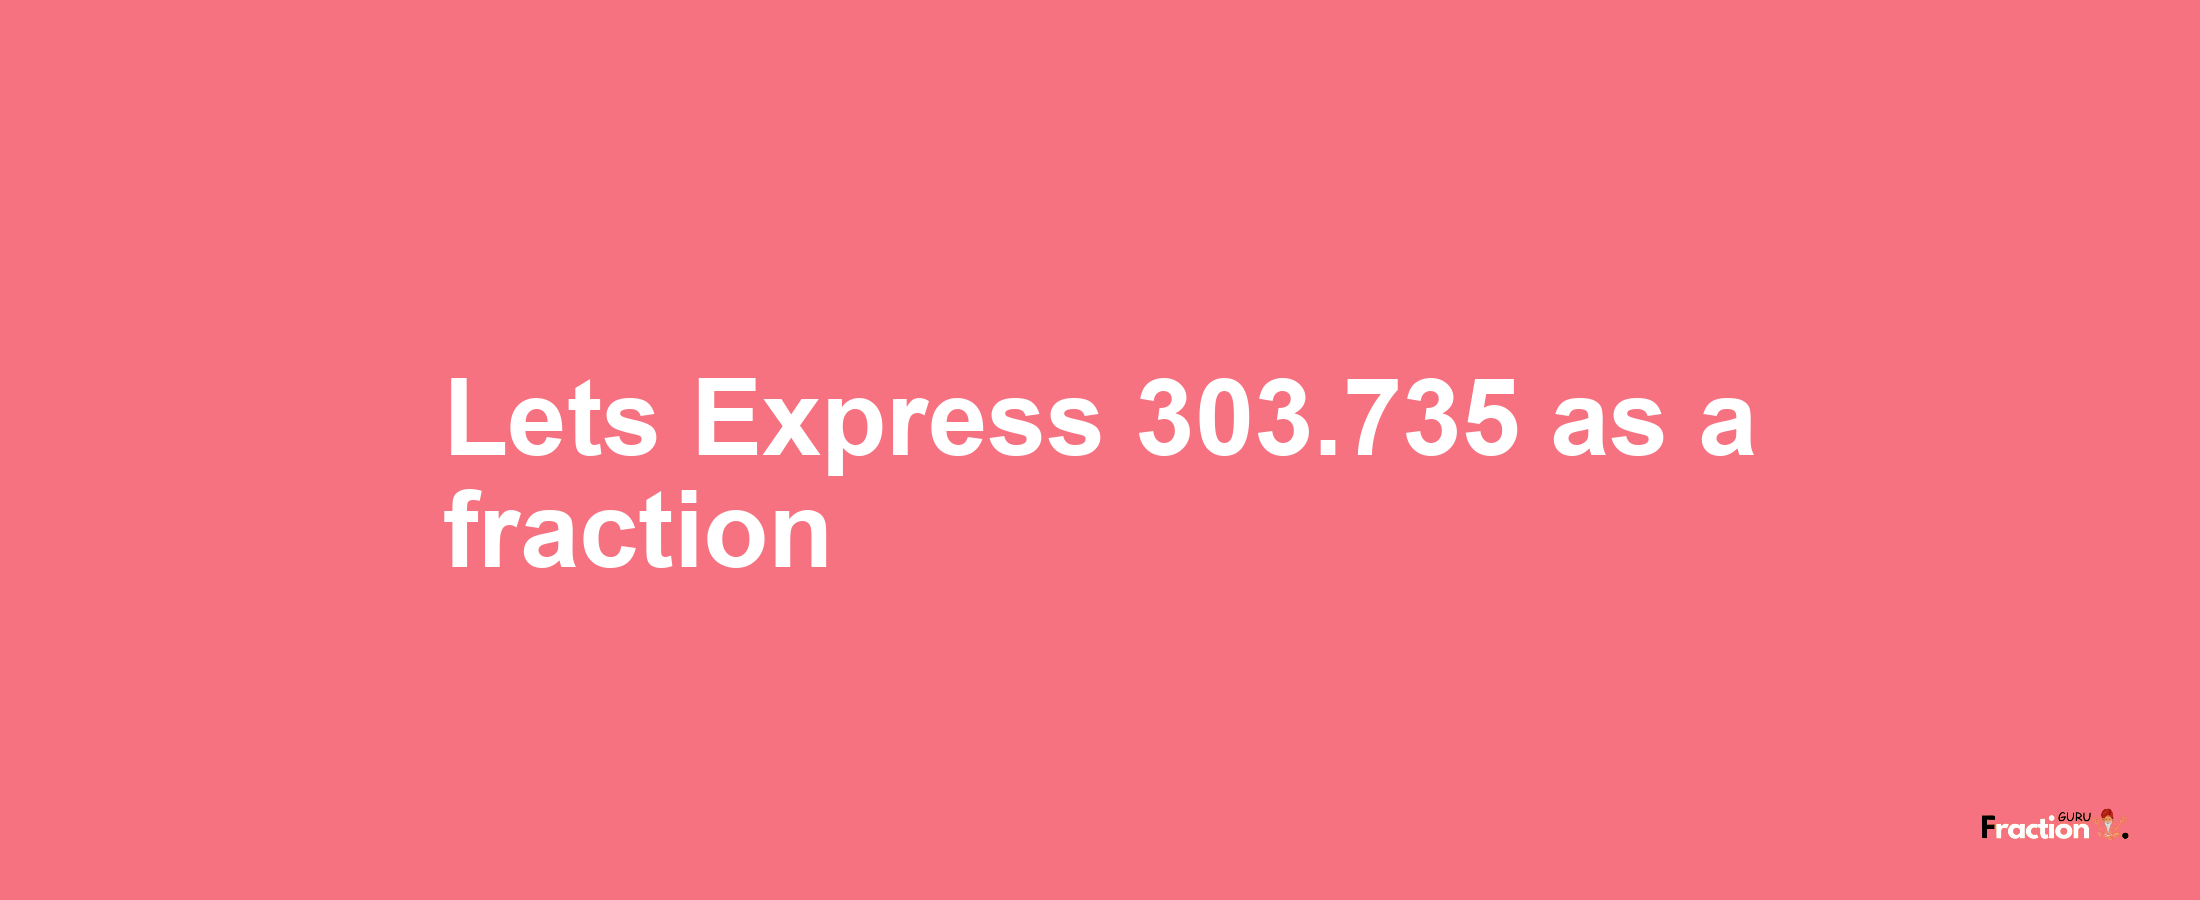 Lets Express 303.735 as afraction